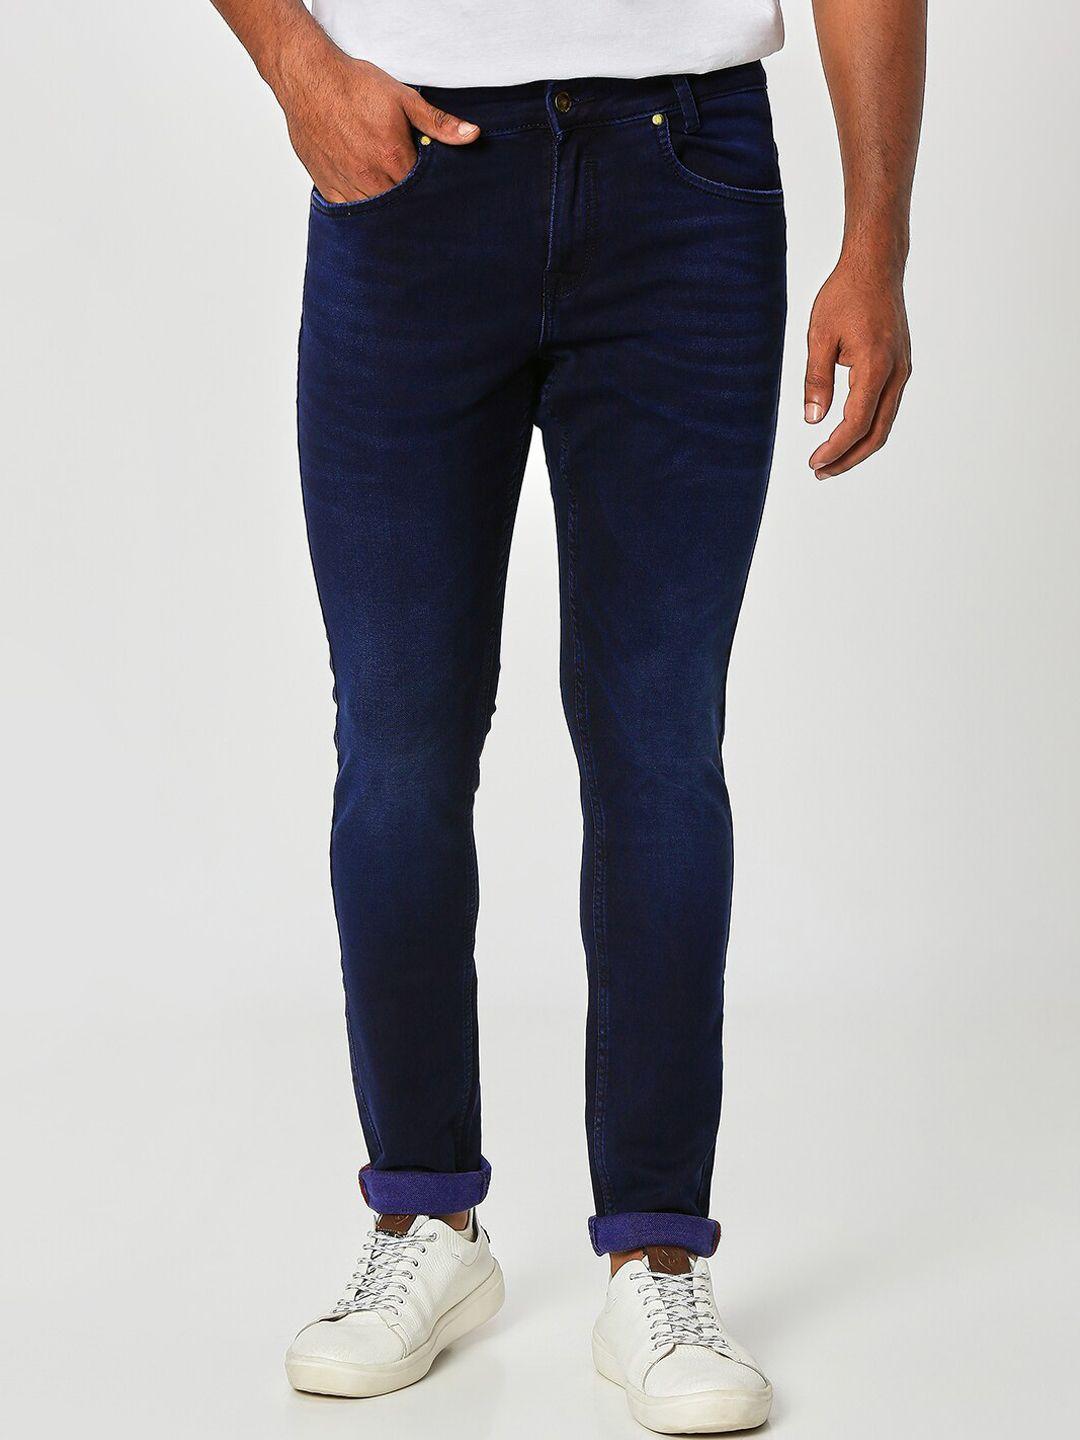 mufti men skinny fit stretchable jeans